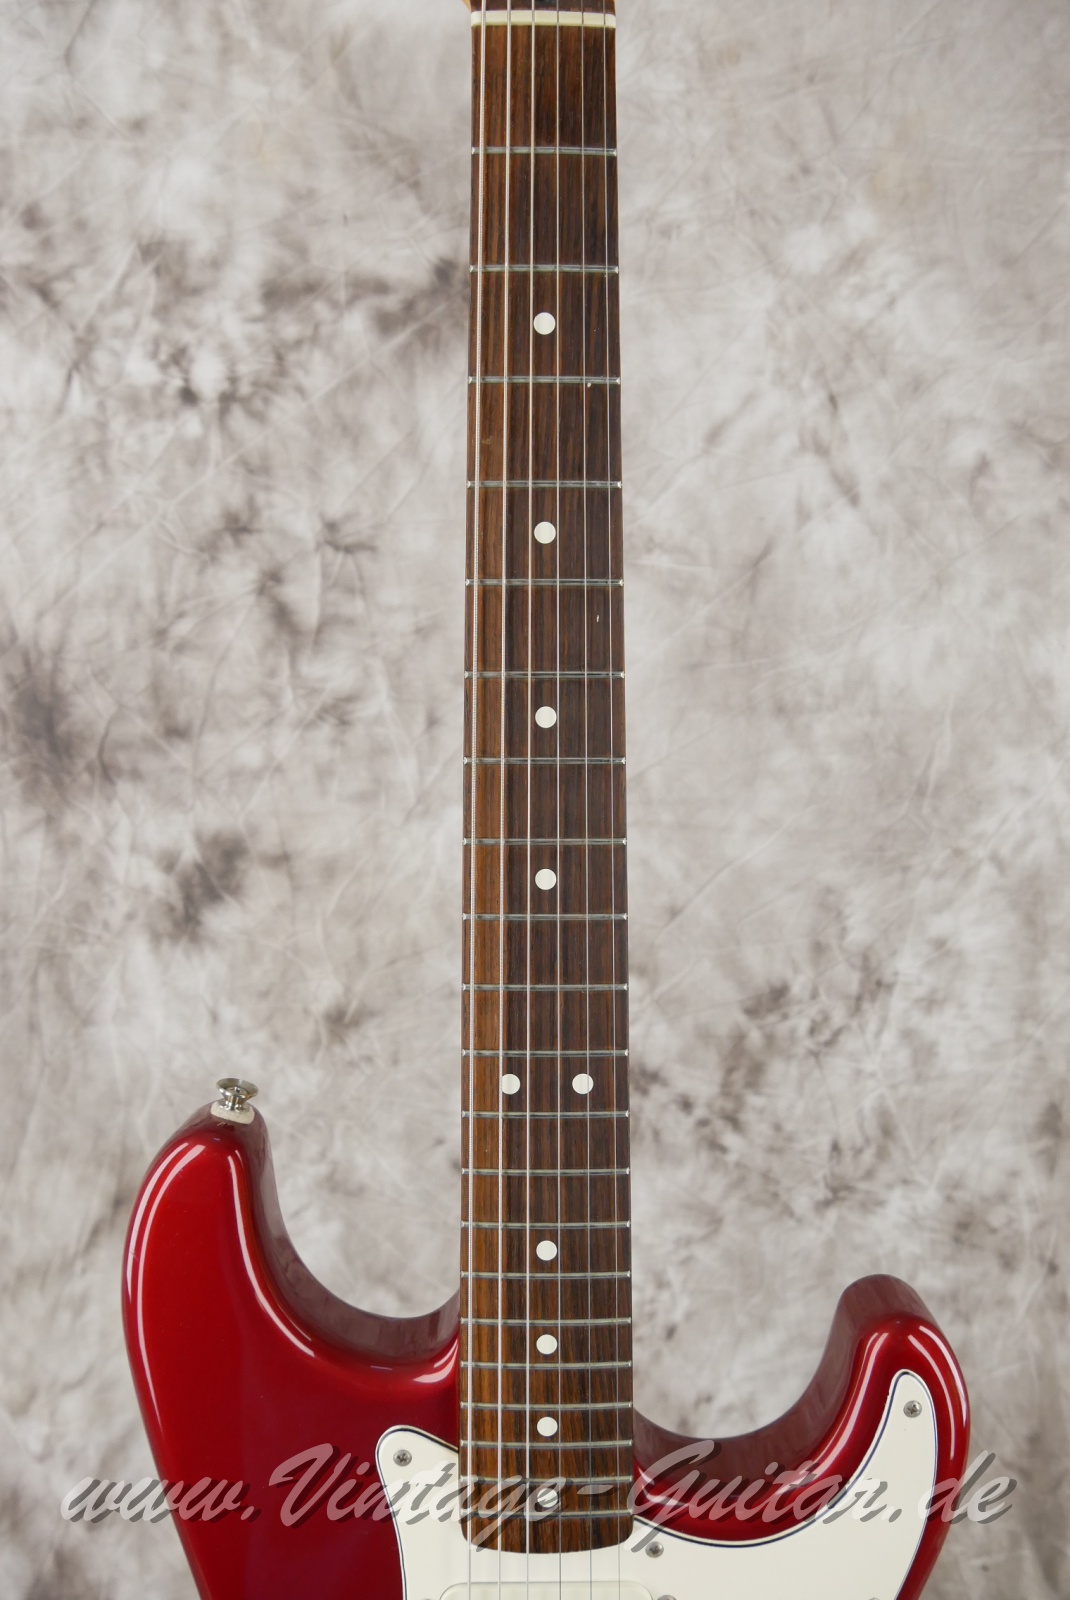 Fender_Stratocaster_Mexico_candy_apple_red_1991-005.JPG